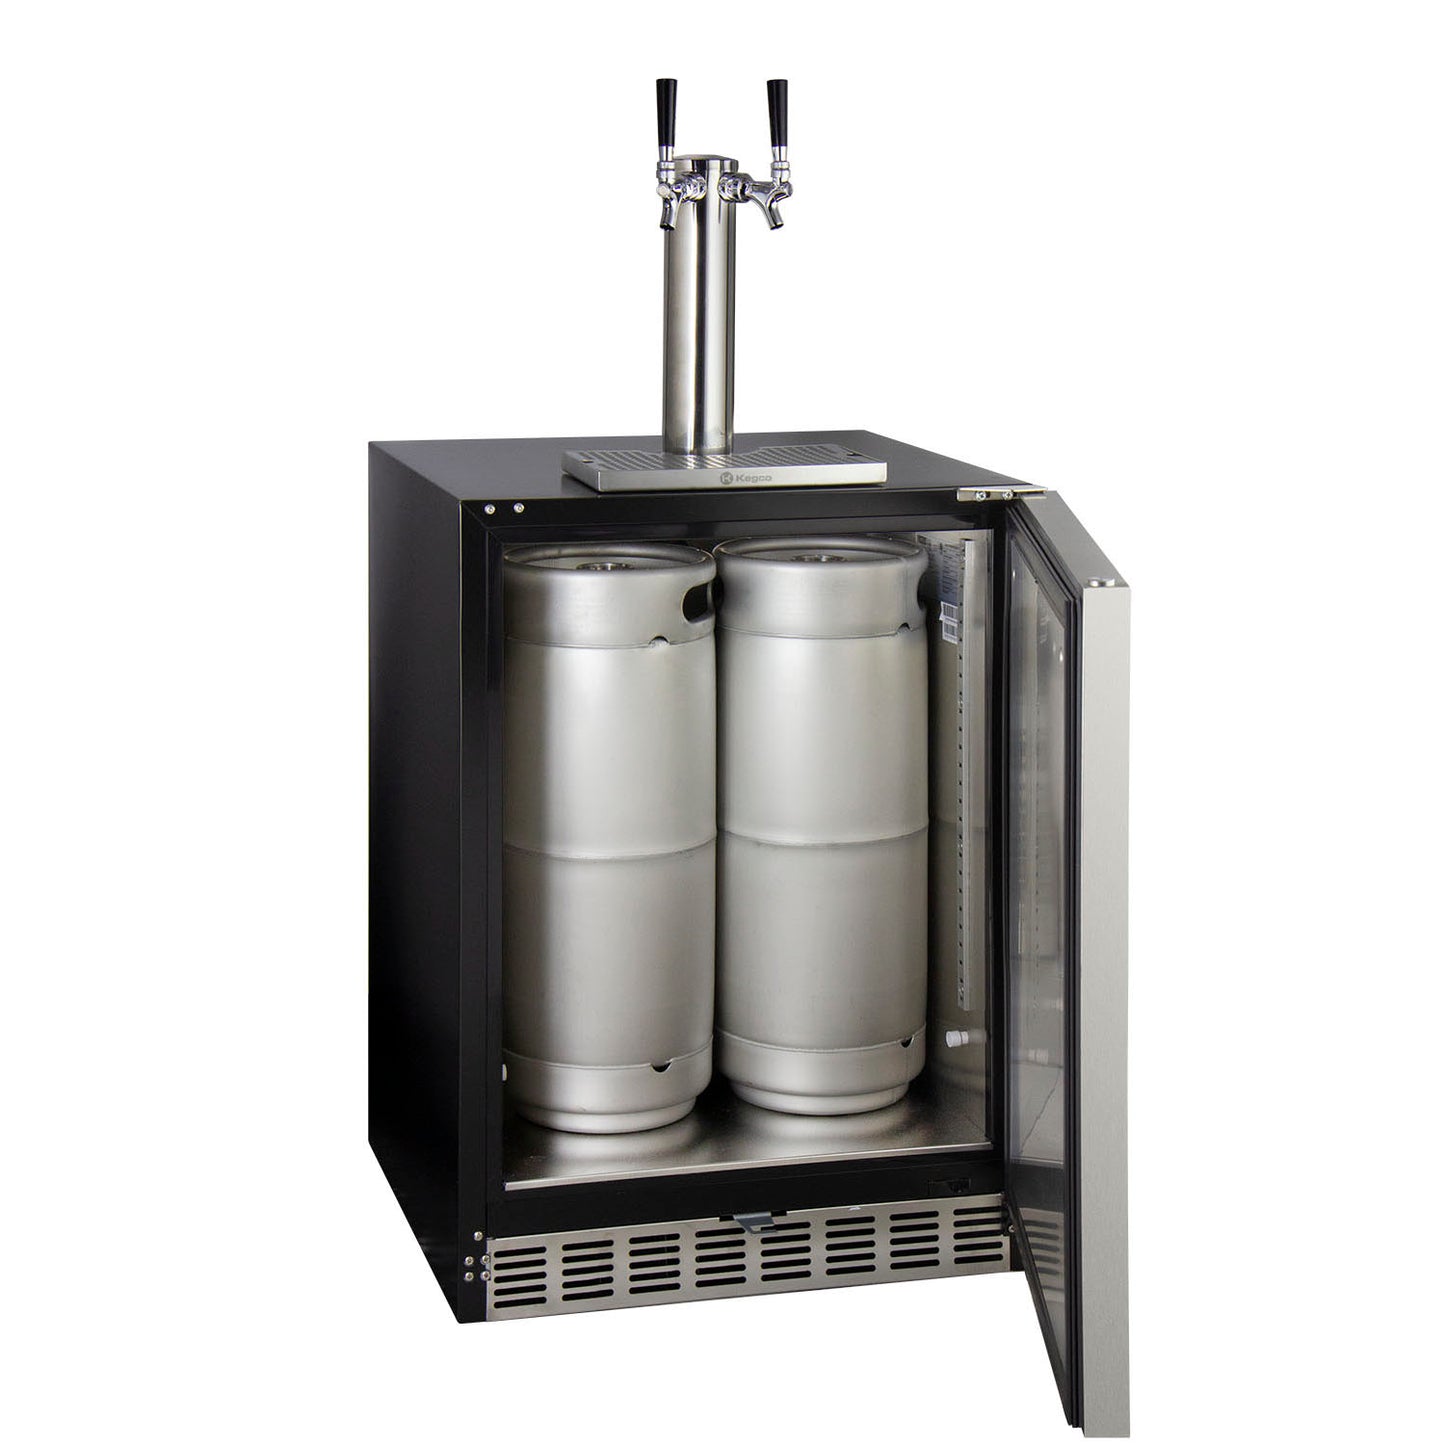 Kegco 24" Wide Dual Tap Stainless Steel Built-In ADA Kegerator with Kit